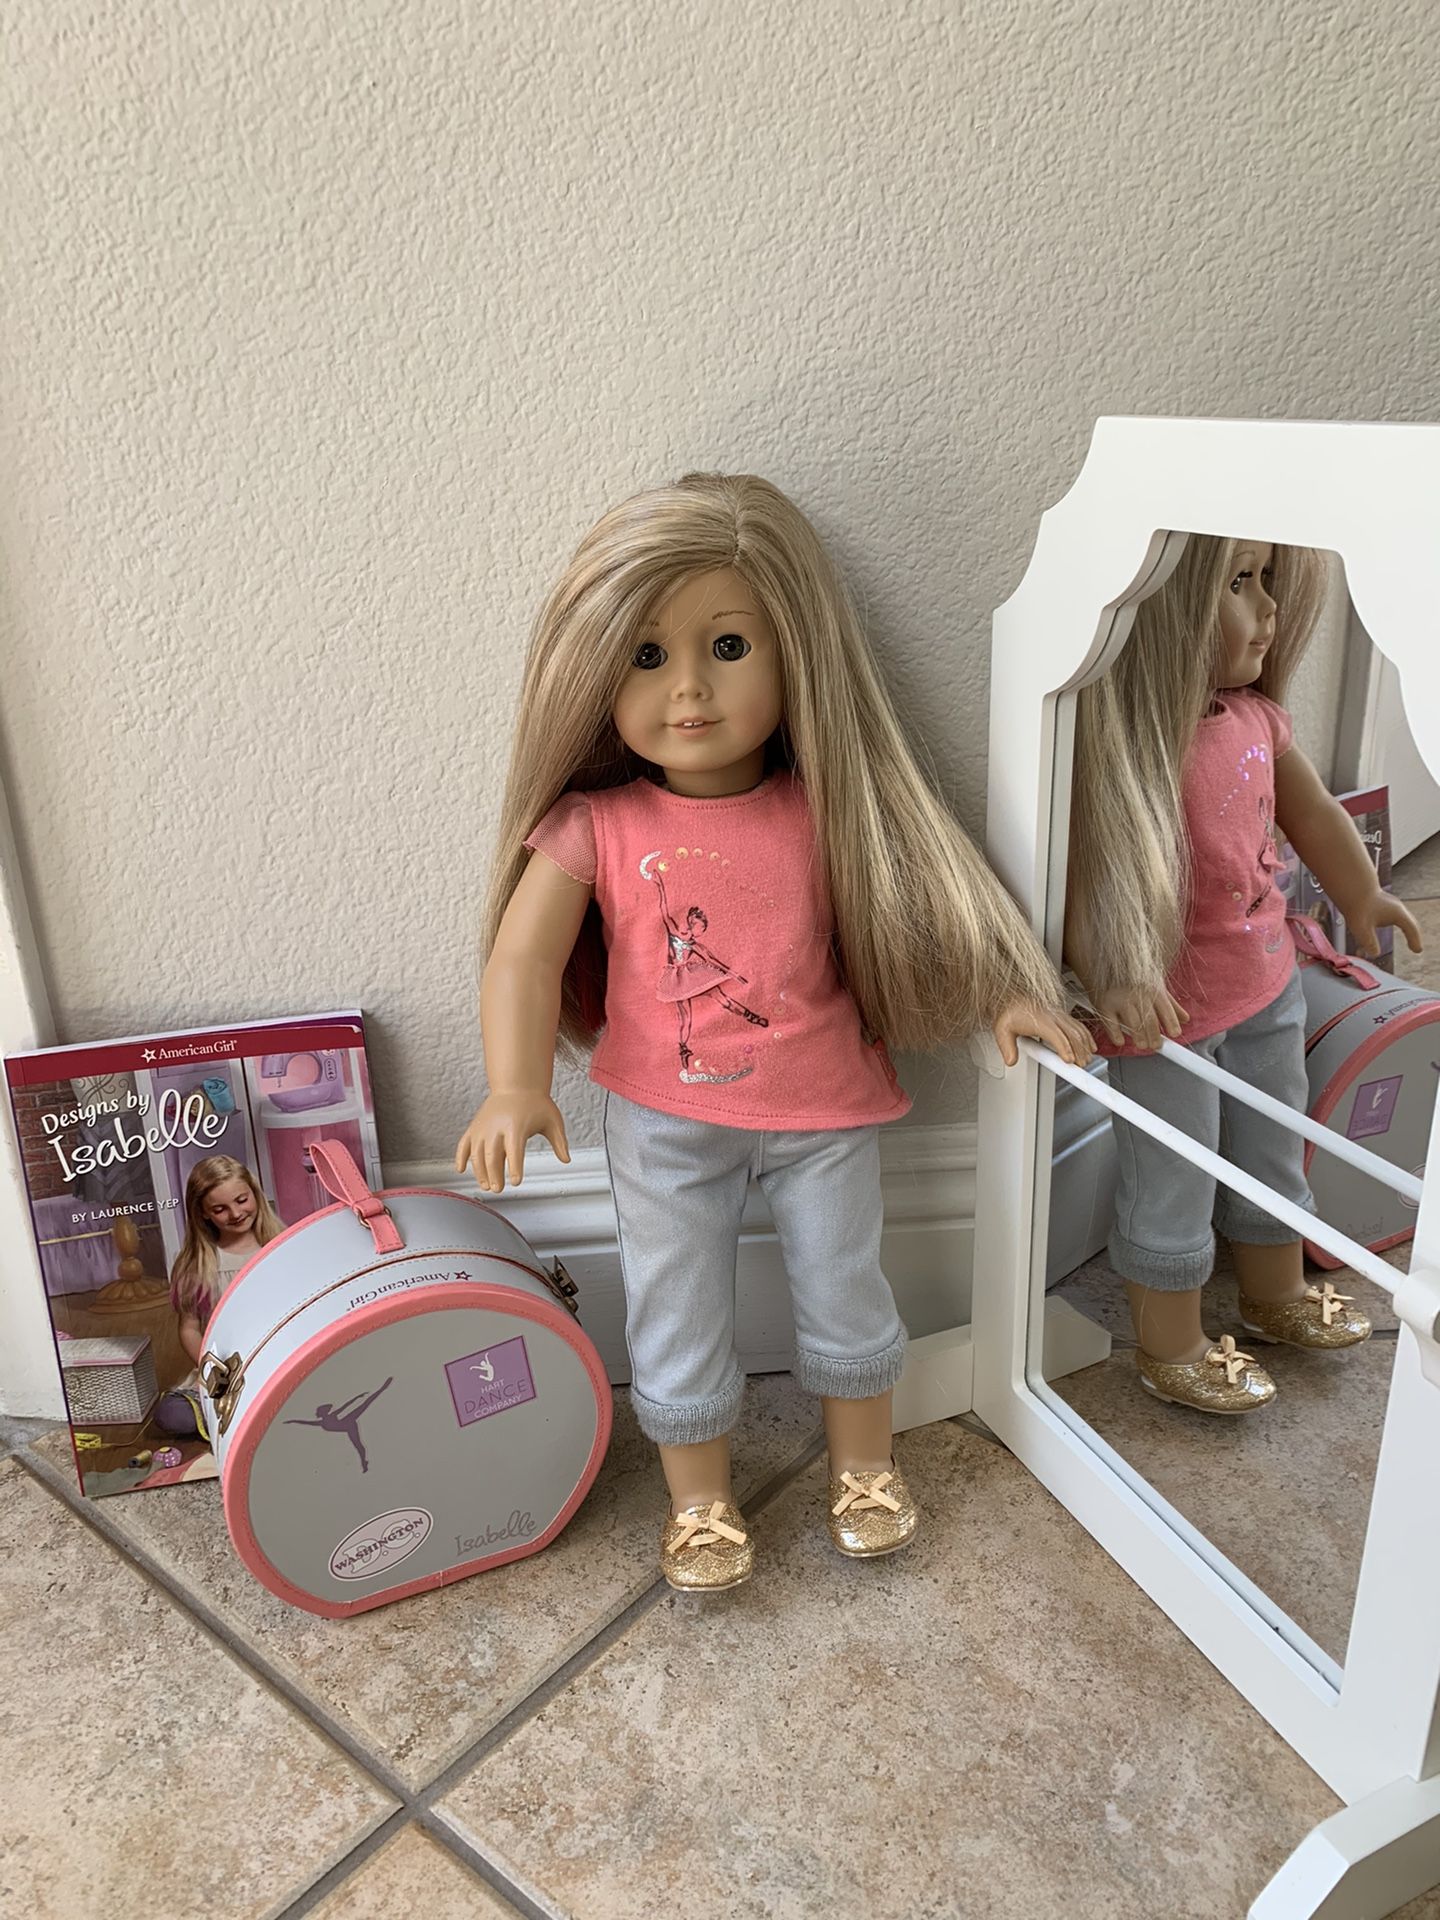 American girl doll Isabell and pottery barn kids ballet mirror